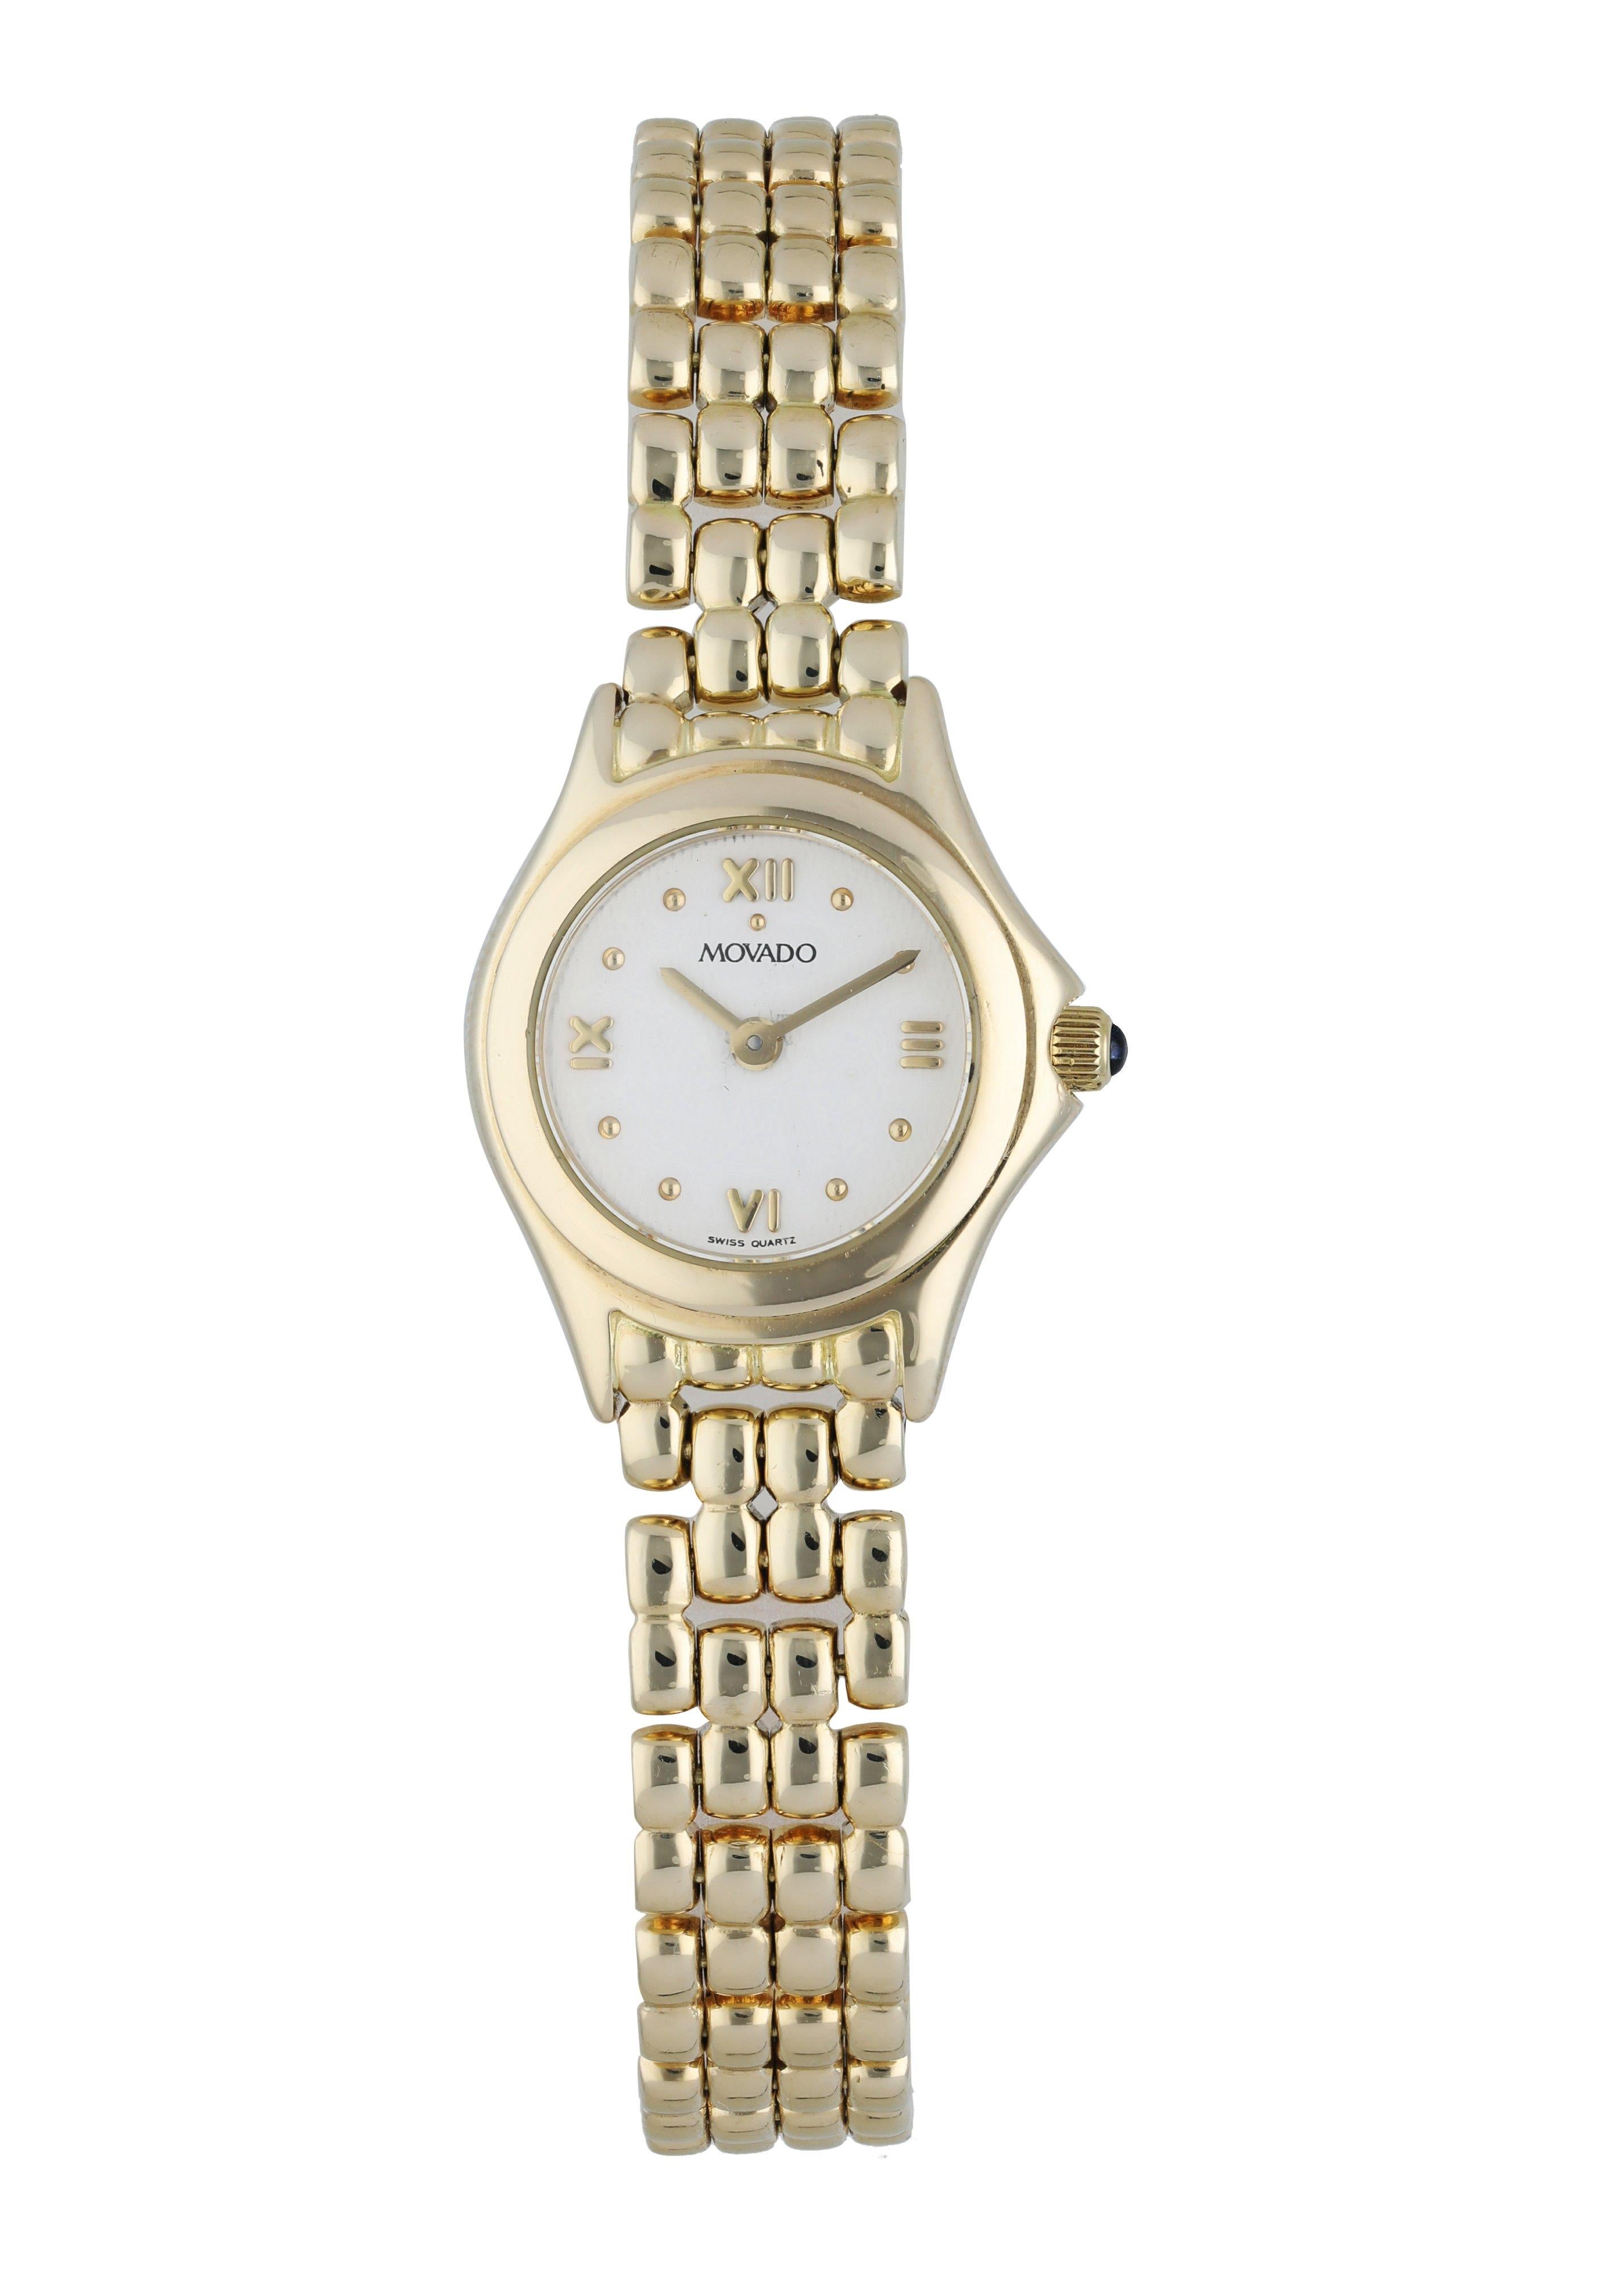  Movado Lumeti 74259811 Ladies Watch. 
 20mm Yellow Gold case. 
 Yellow Gold smooth bezel. 
 White dial with gold hands and Roman numeral hour markers by the 3, 6, 9, and 12 o'clock position. 
 Yellow Gold Bracelet with Butterfly Clasp. 
 Will fit